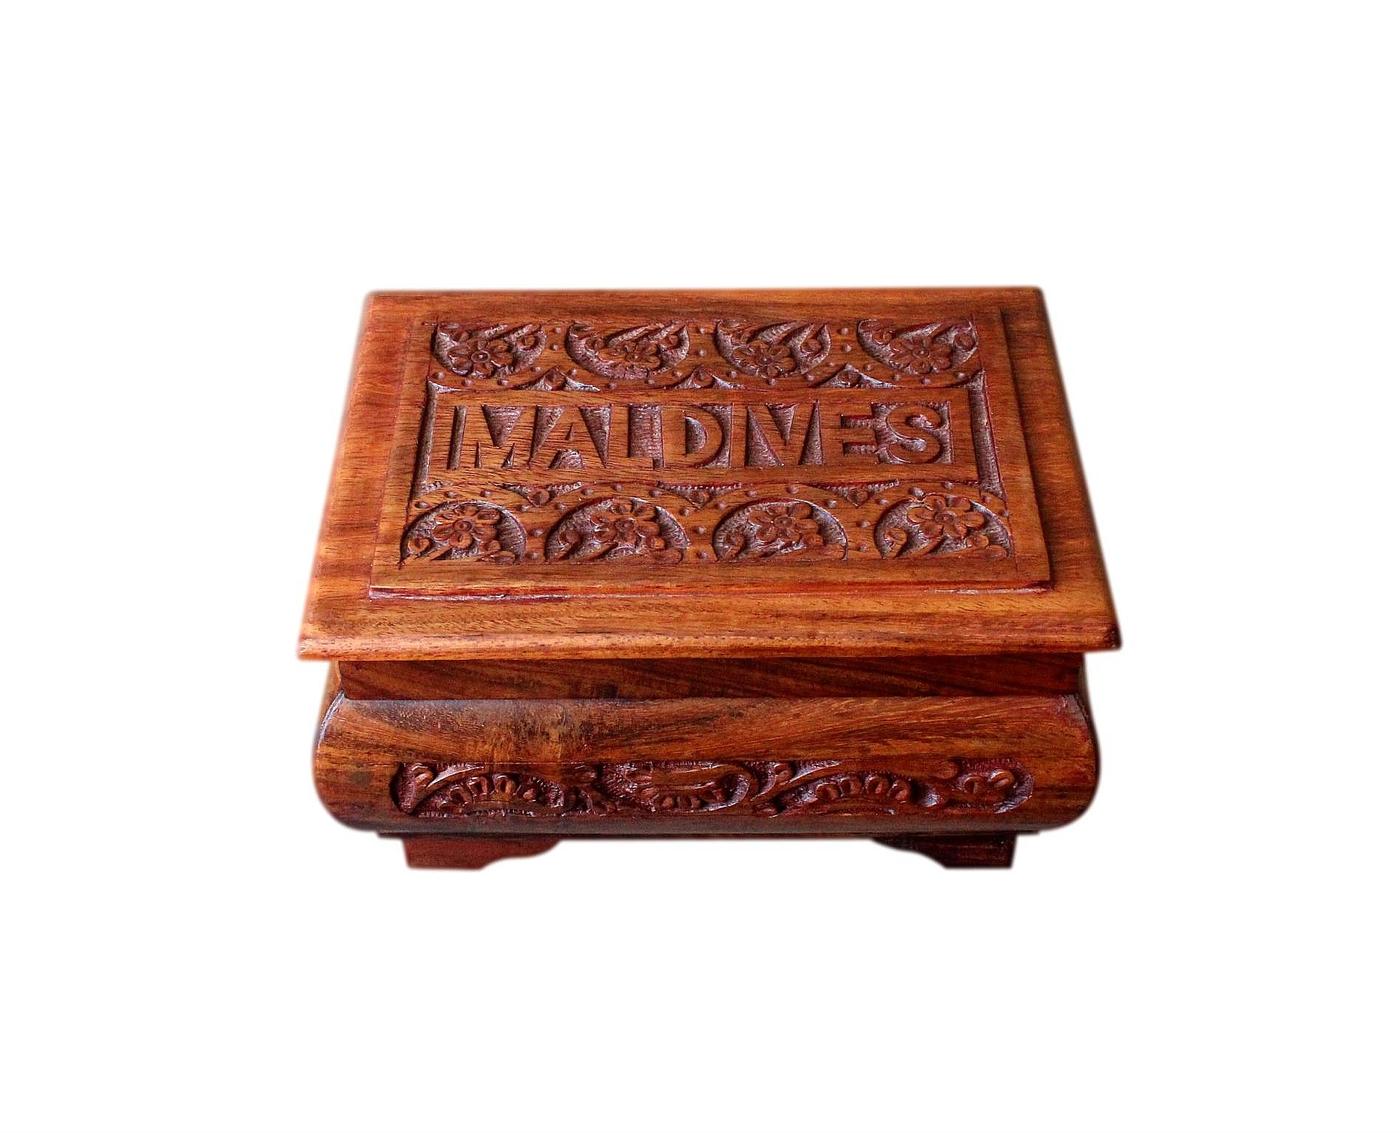 Beautiful Vintage Jewellery Box From The Maldives